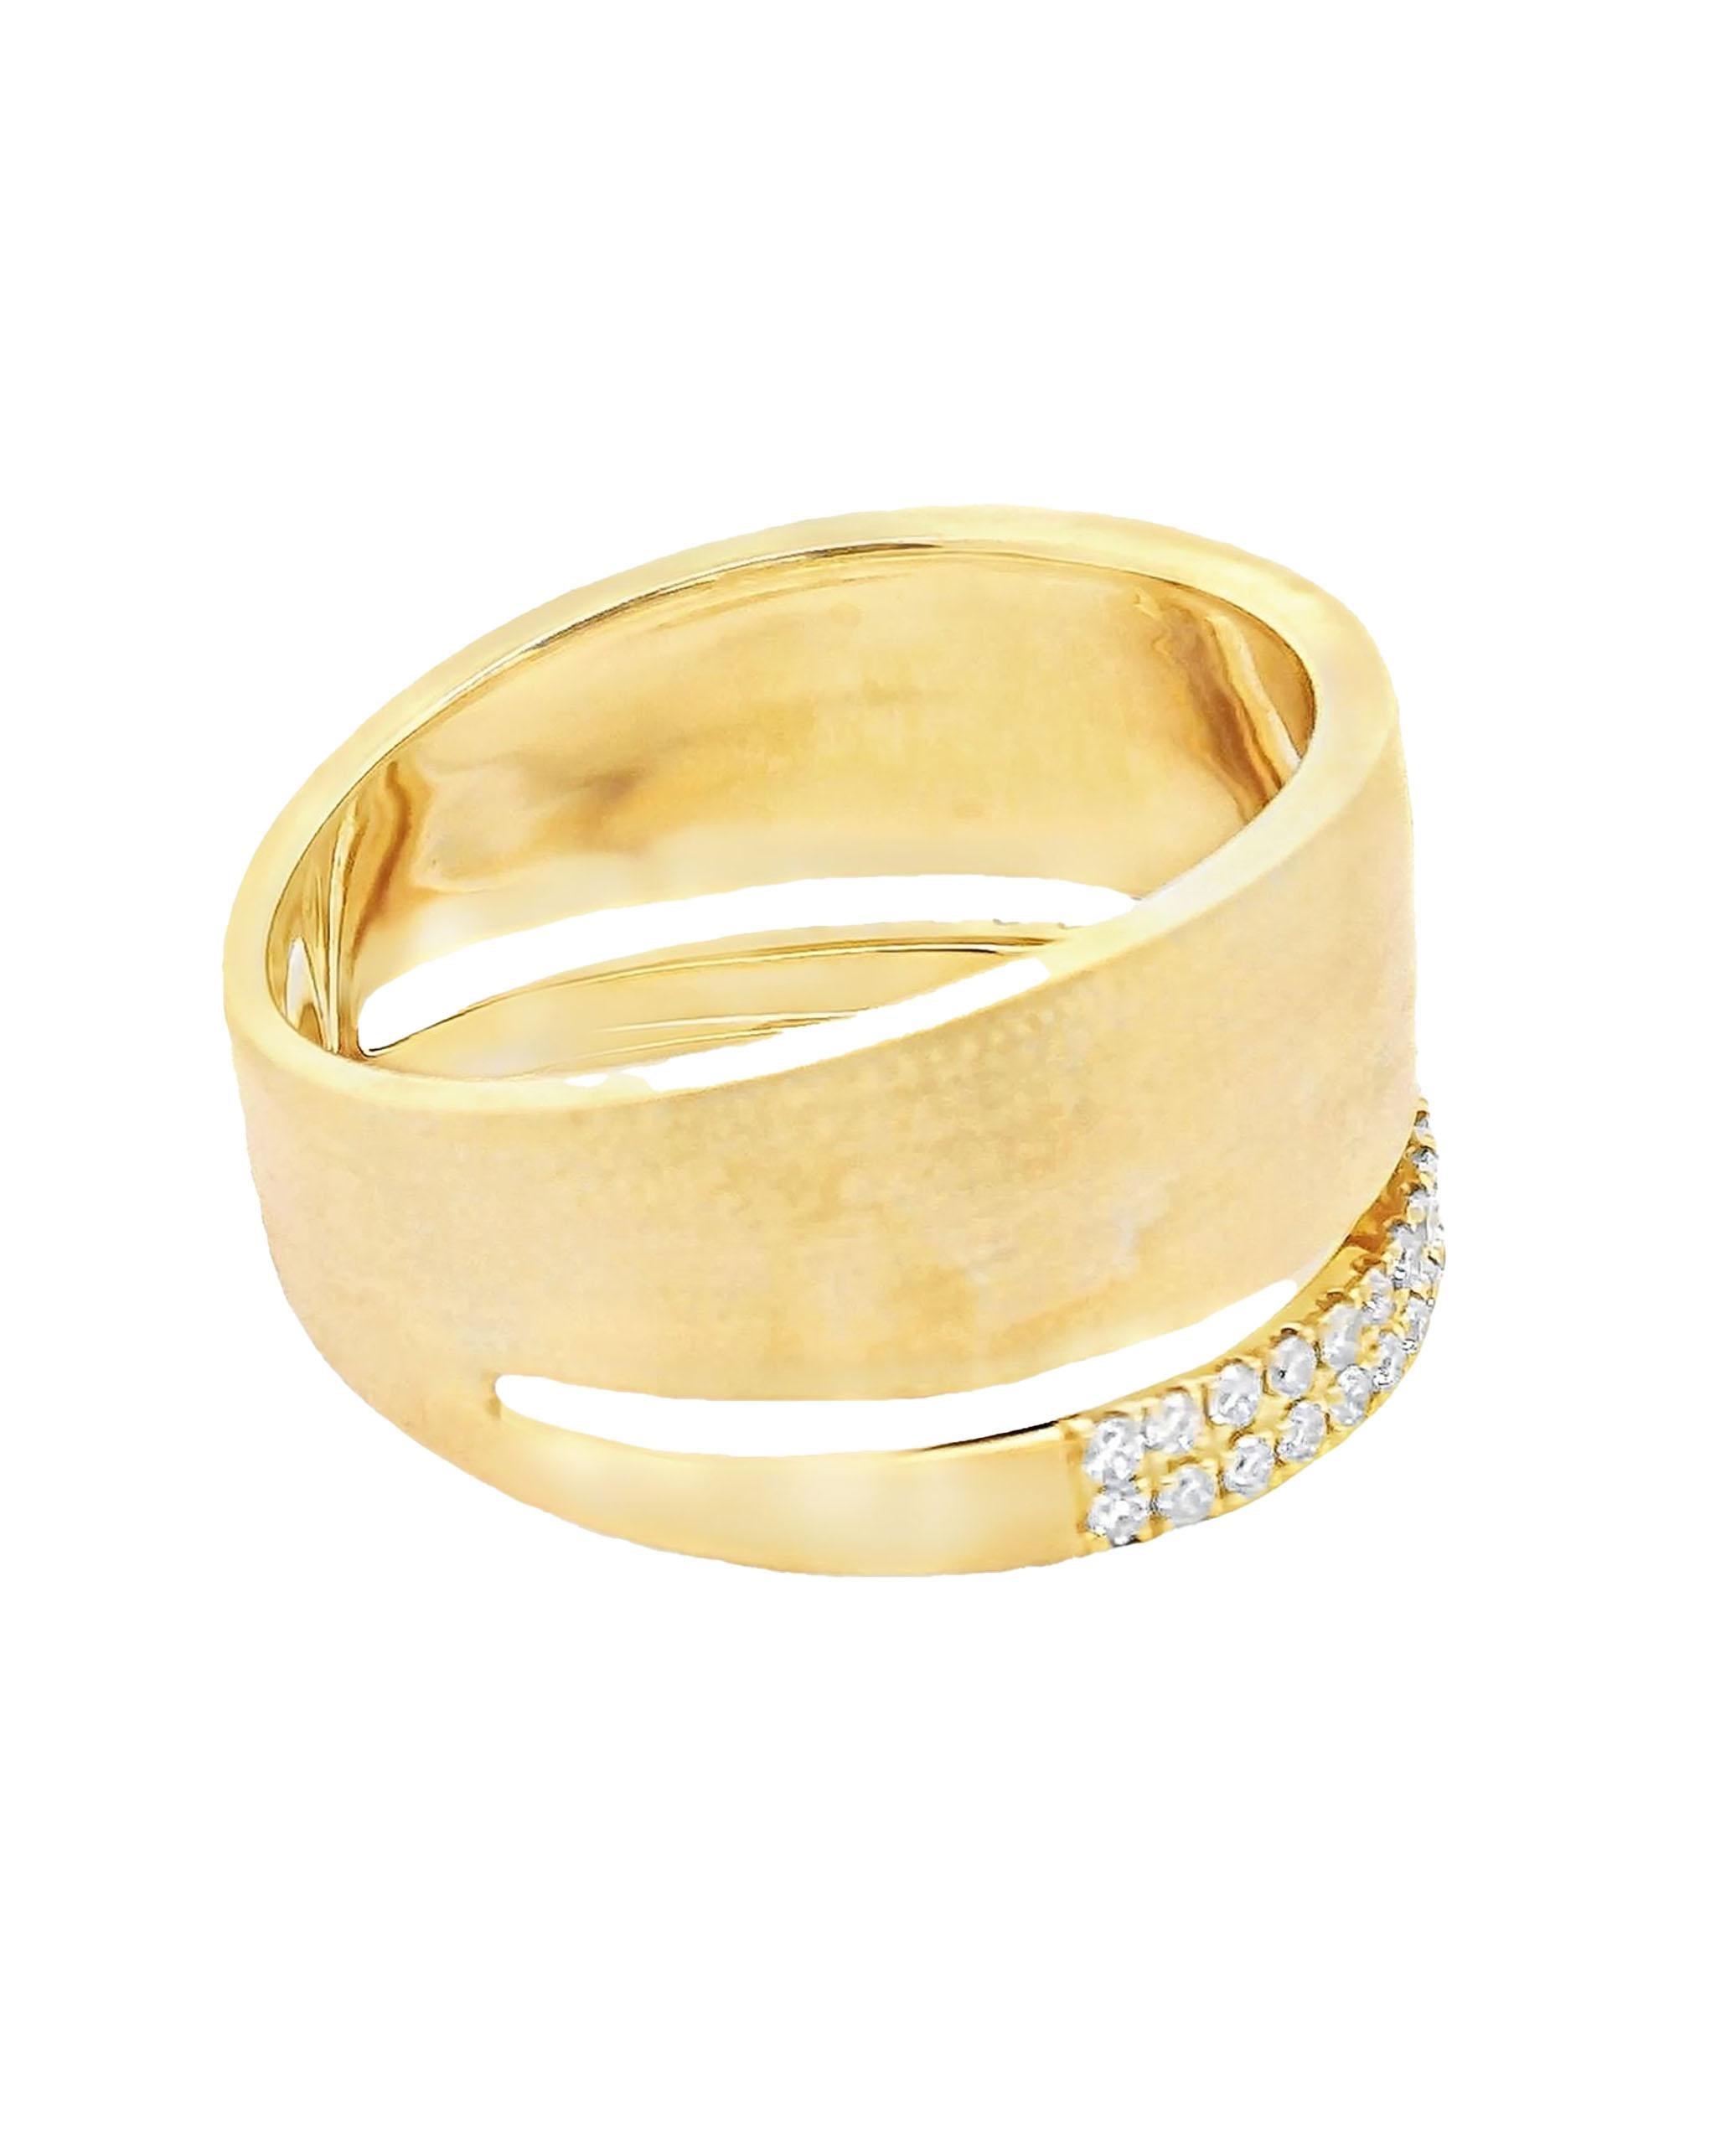 Contemporary 18K Yellow Gold Wide Band Ring with Row of Pave Diamonds For Sale